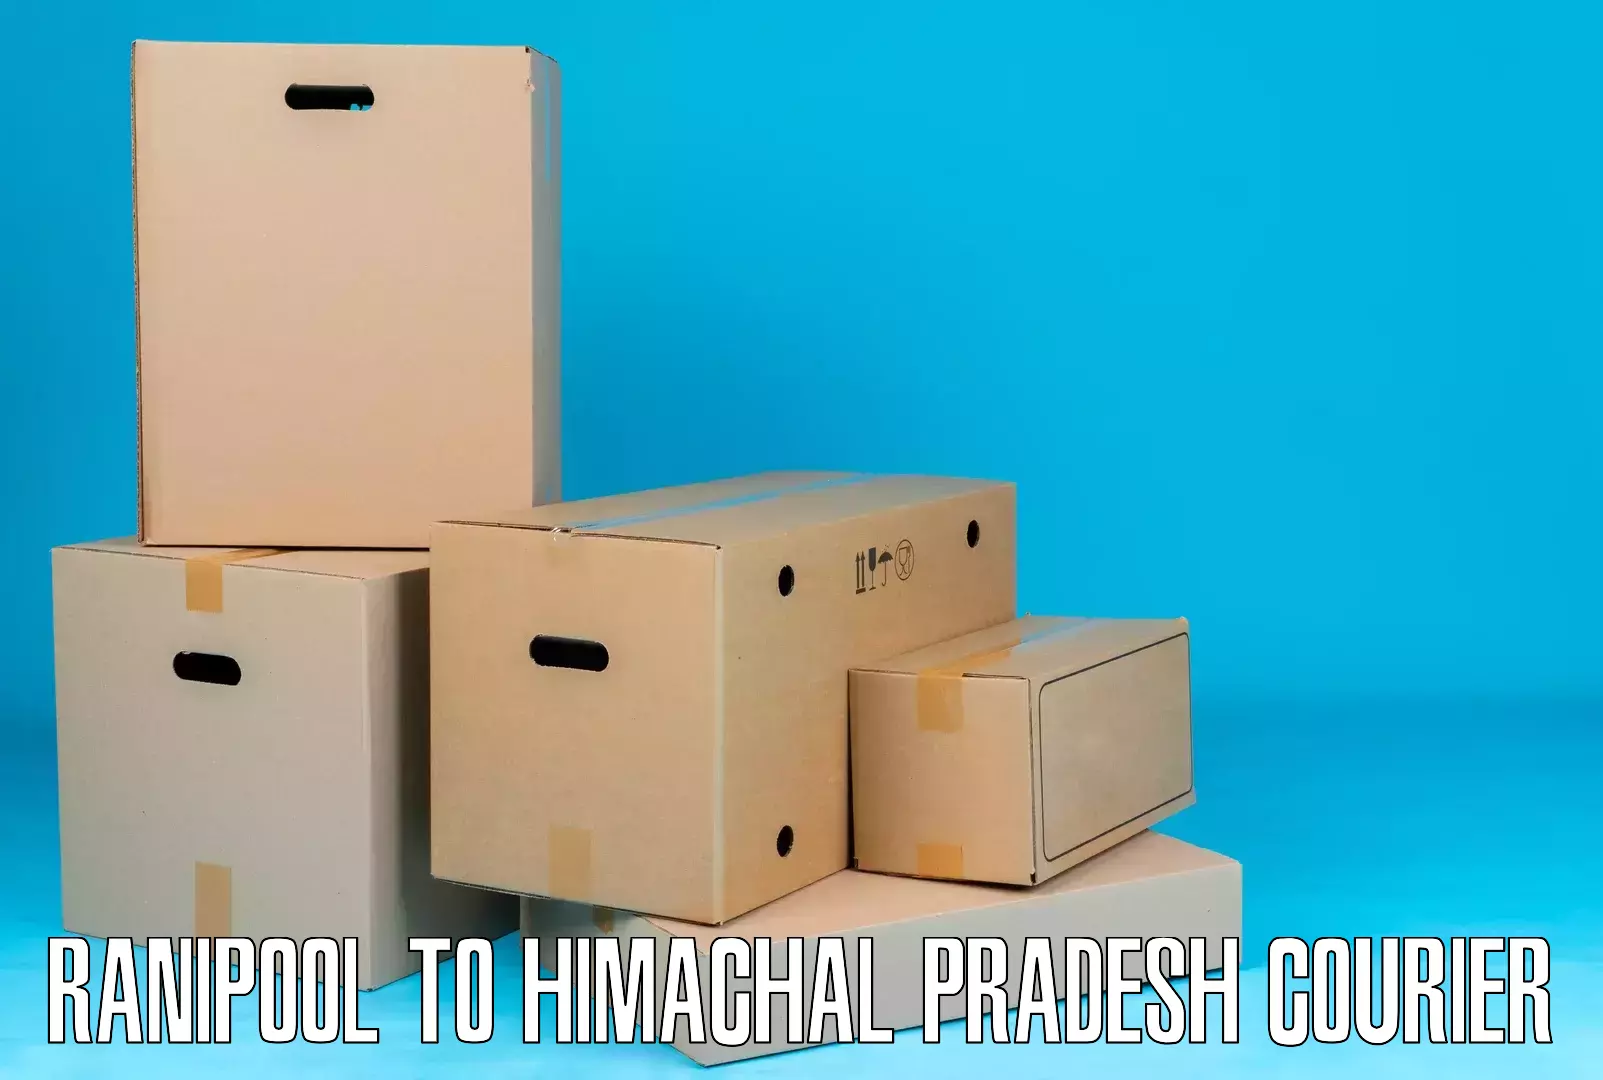 Sustainable shipping practices Ranipool to Himachal Pradesh